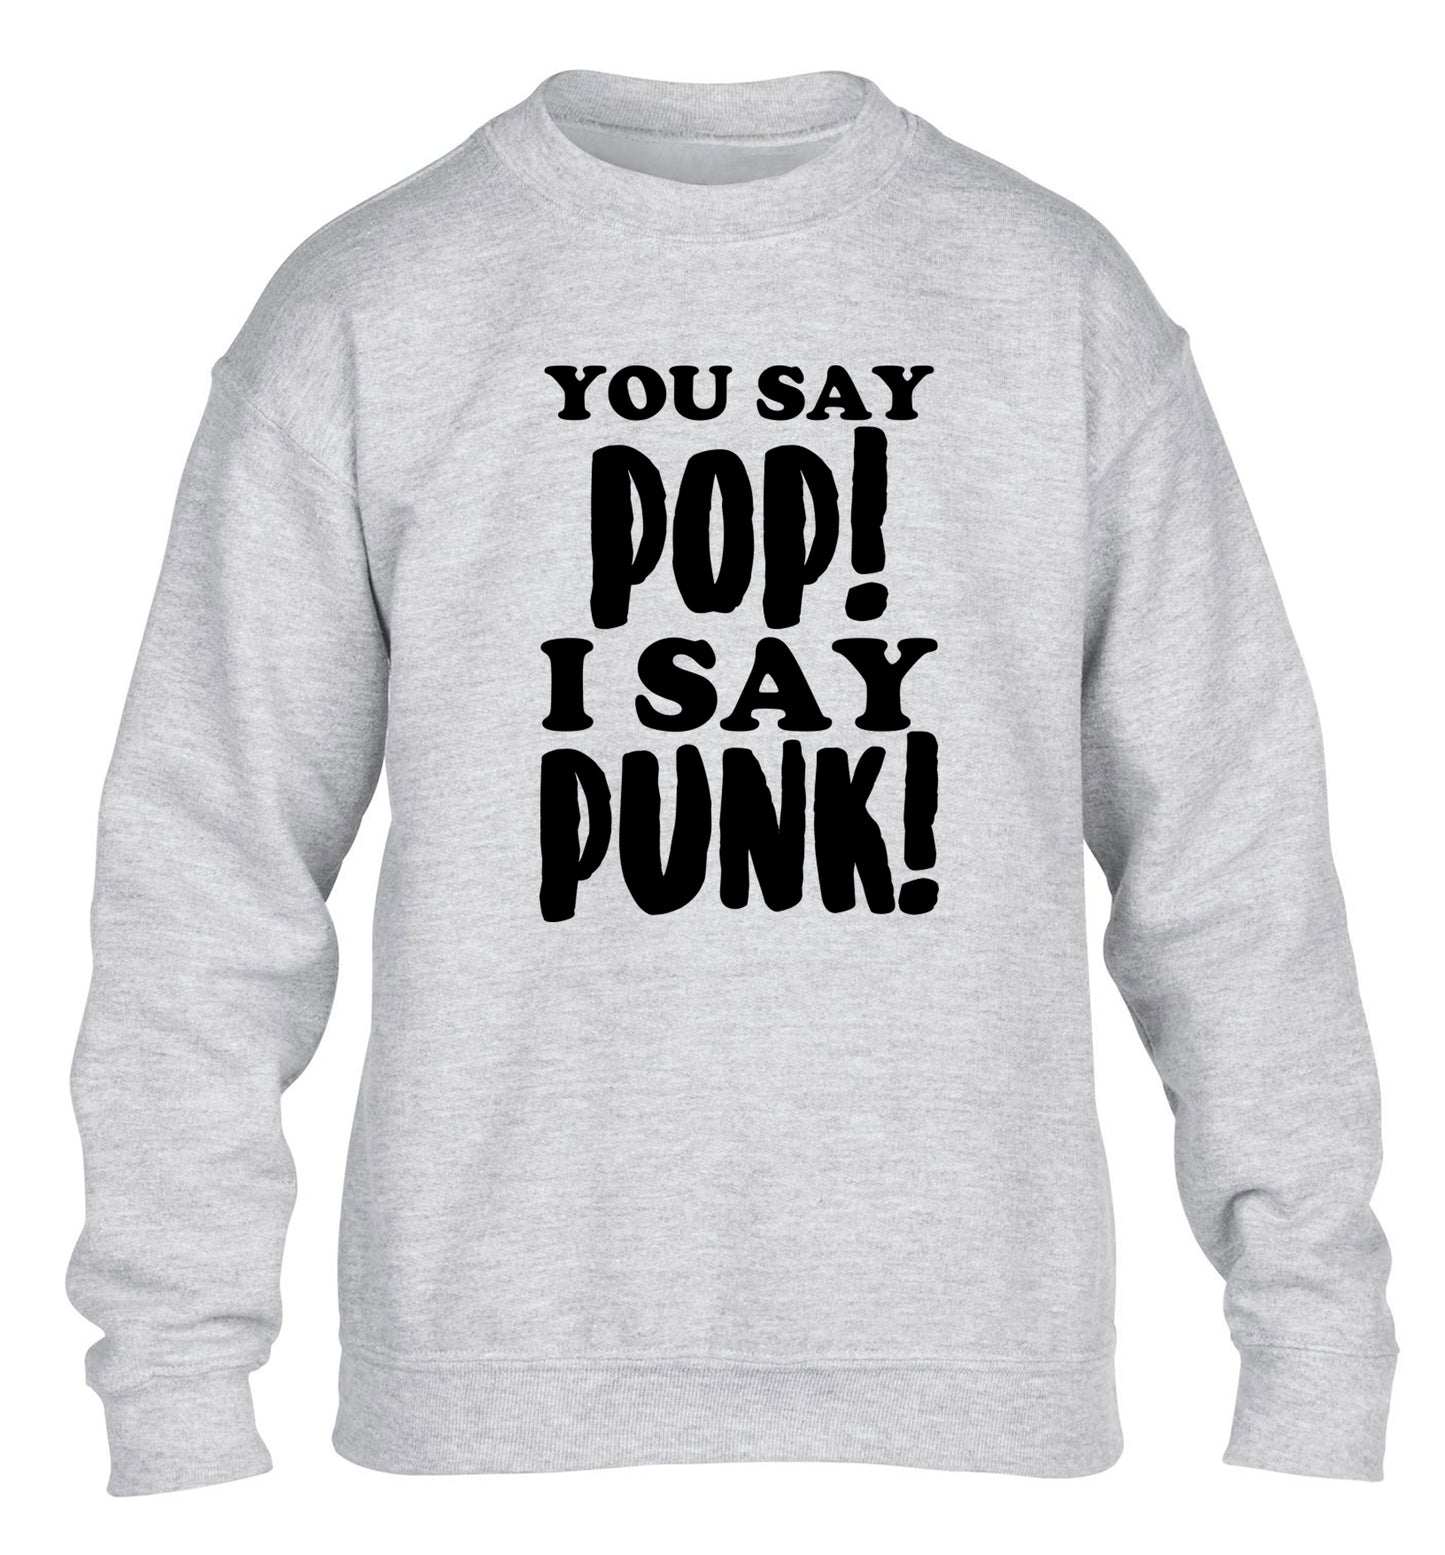 You say pop I say punk! children's grey sweater 12-14 Years